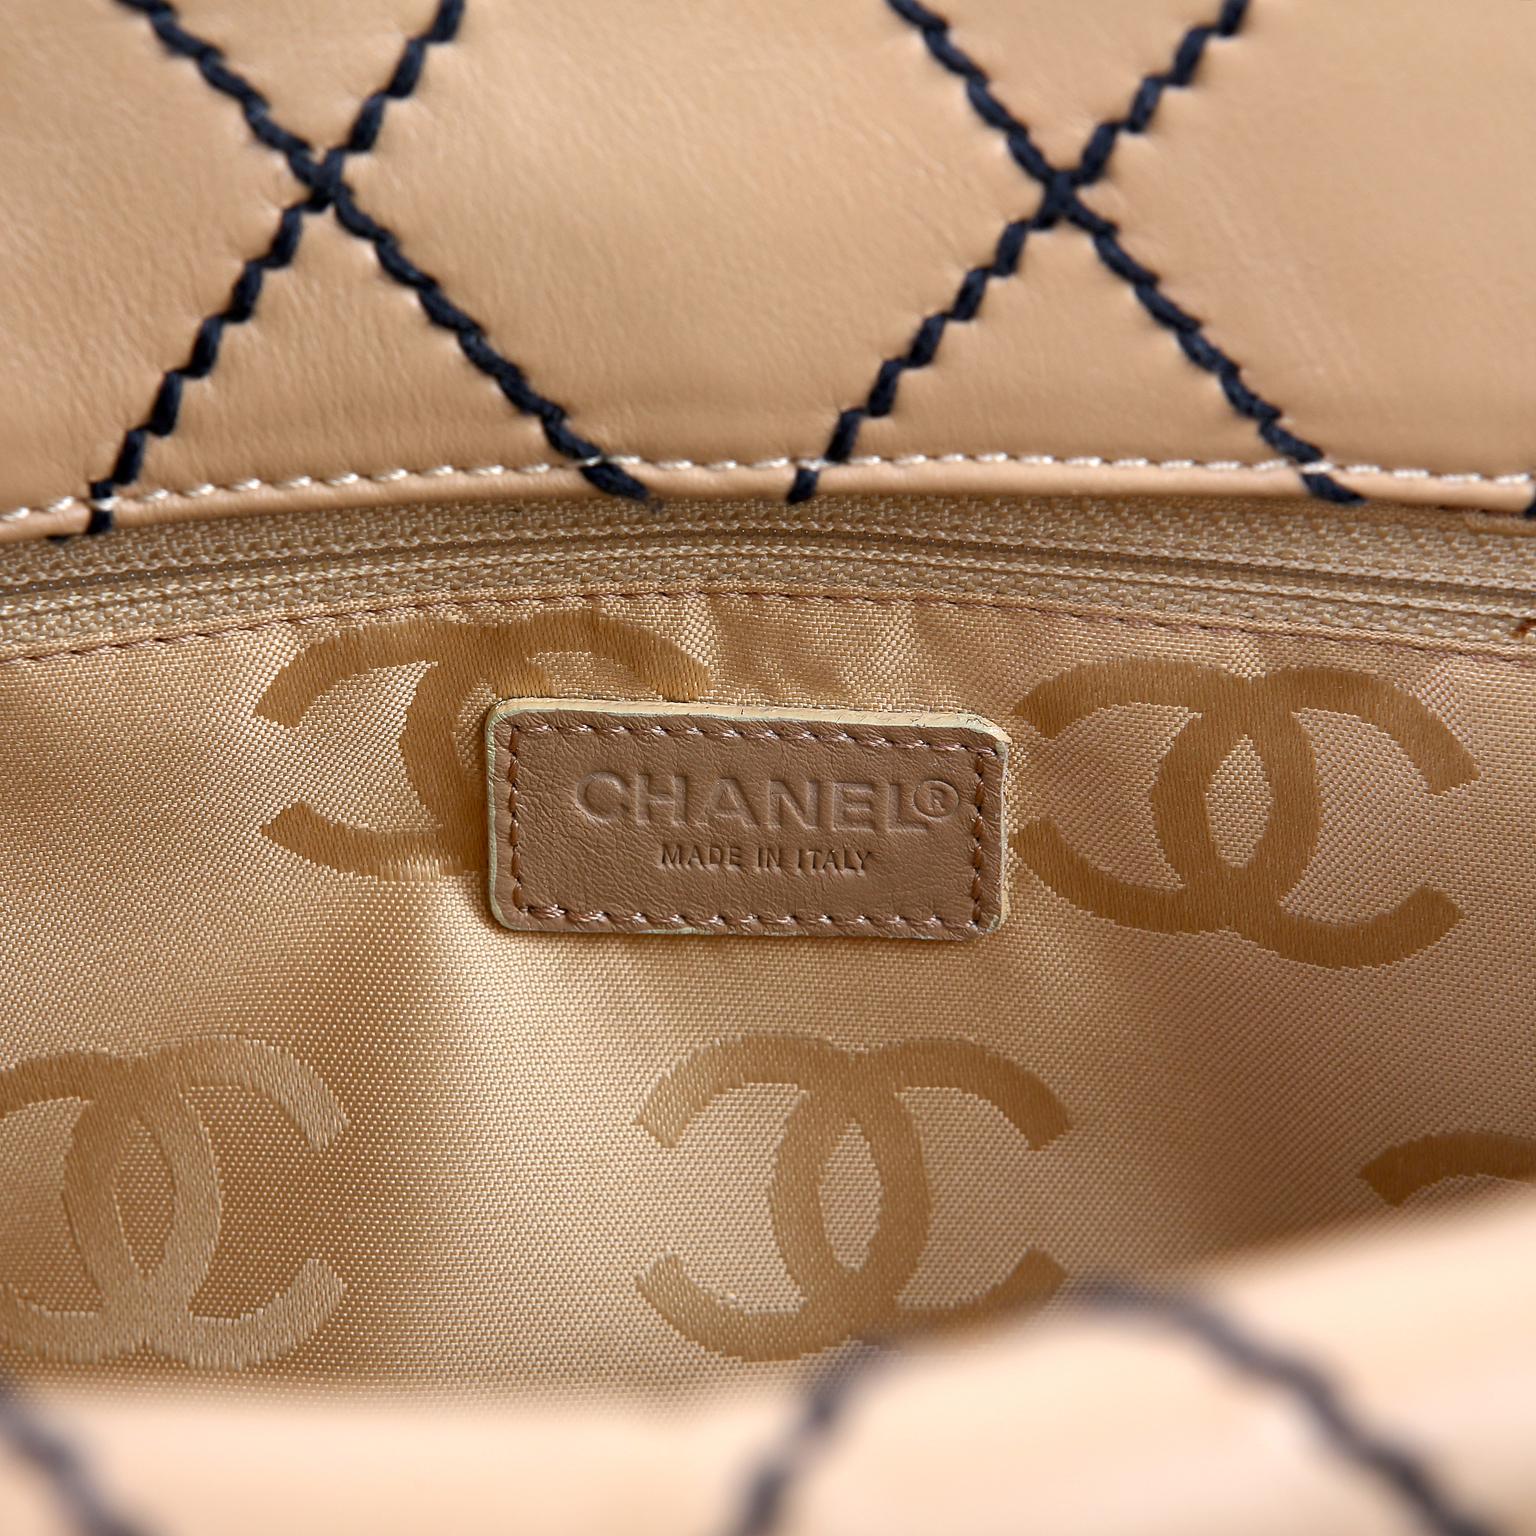 Chanel Beige Leather Tote with Black Top Stitching 9